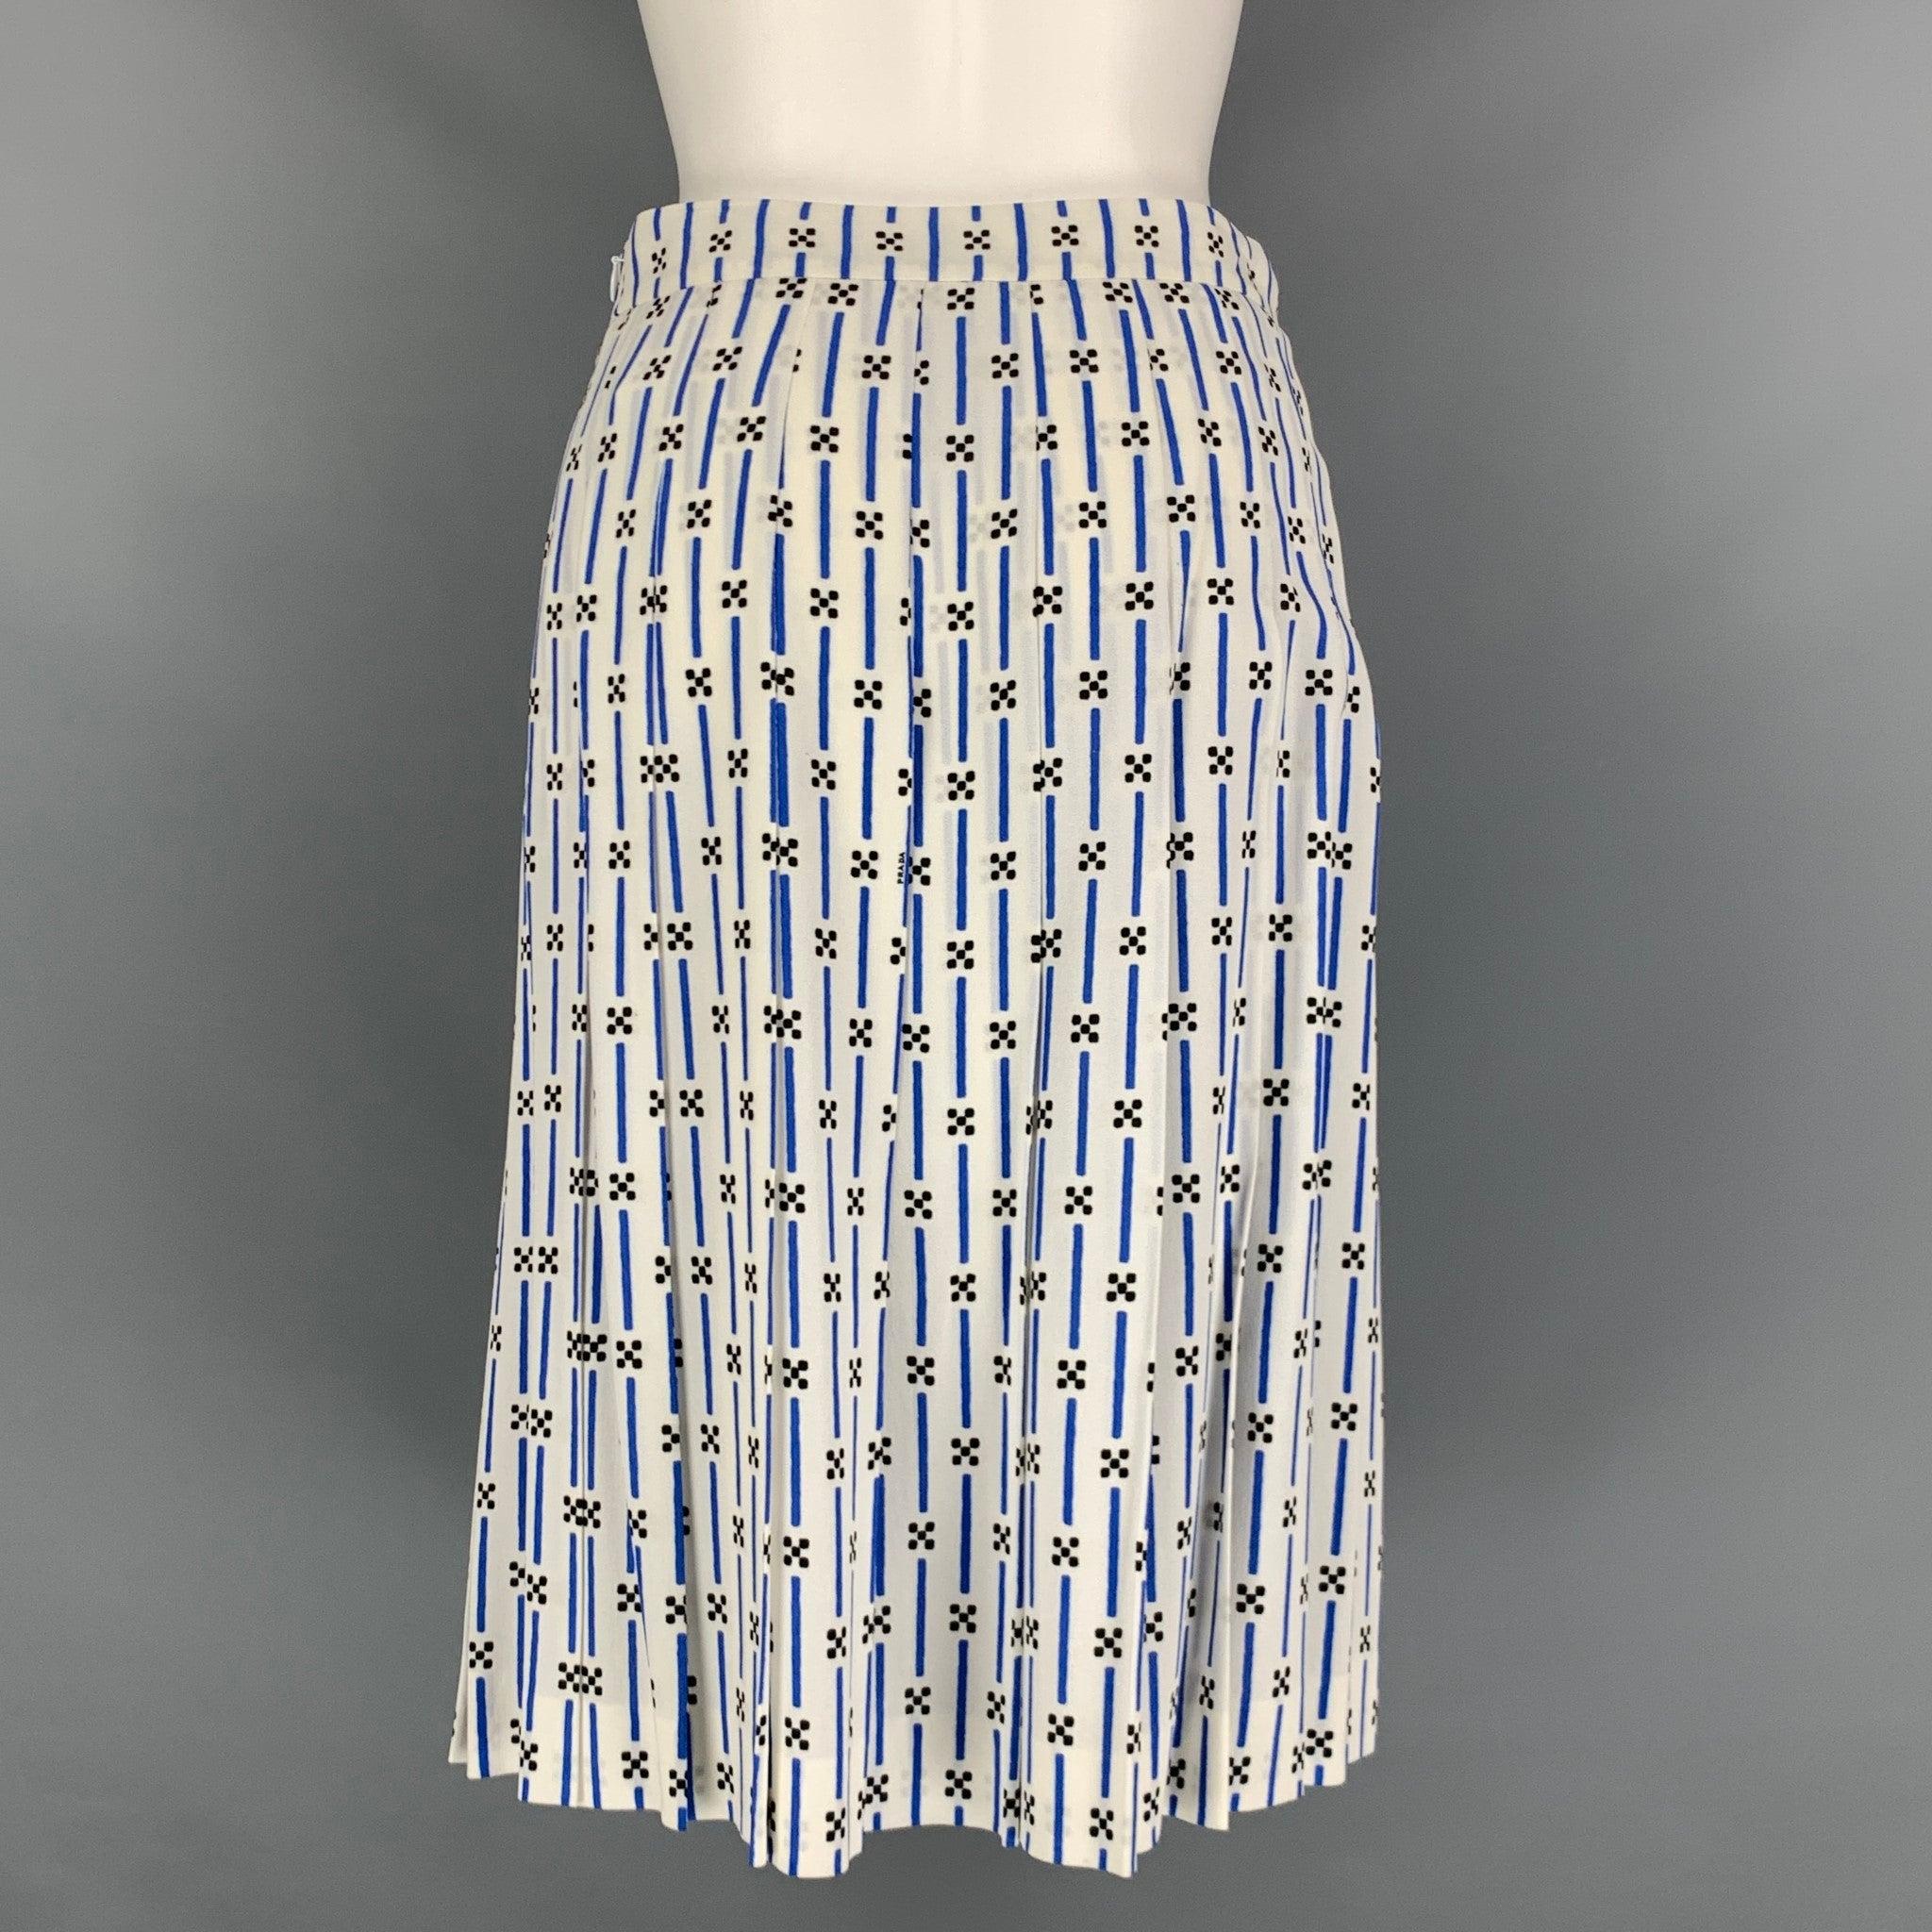 PRADA skirt comes in a blue and white viscose and elastane woven material featuring a pleated style, mid-calf length, and a back zip up closure. Made in Italy.Excellent Pre-Owned Condition. 

Marked:   40 

Measurements: 
  Waist: 28 inches Hip: 38